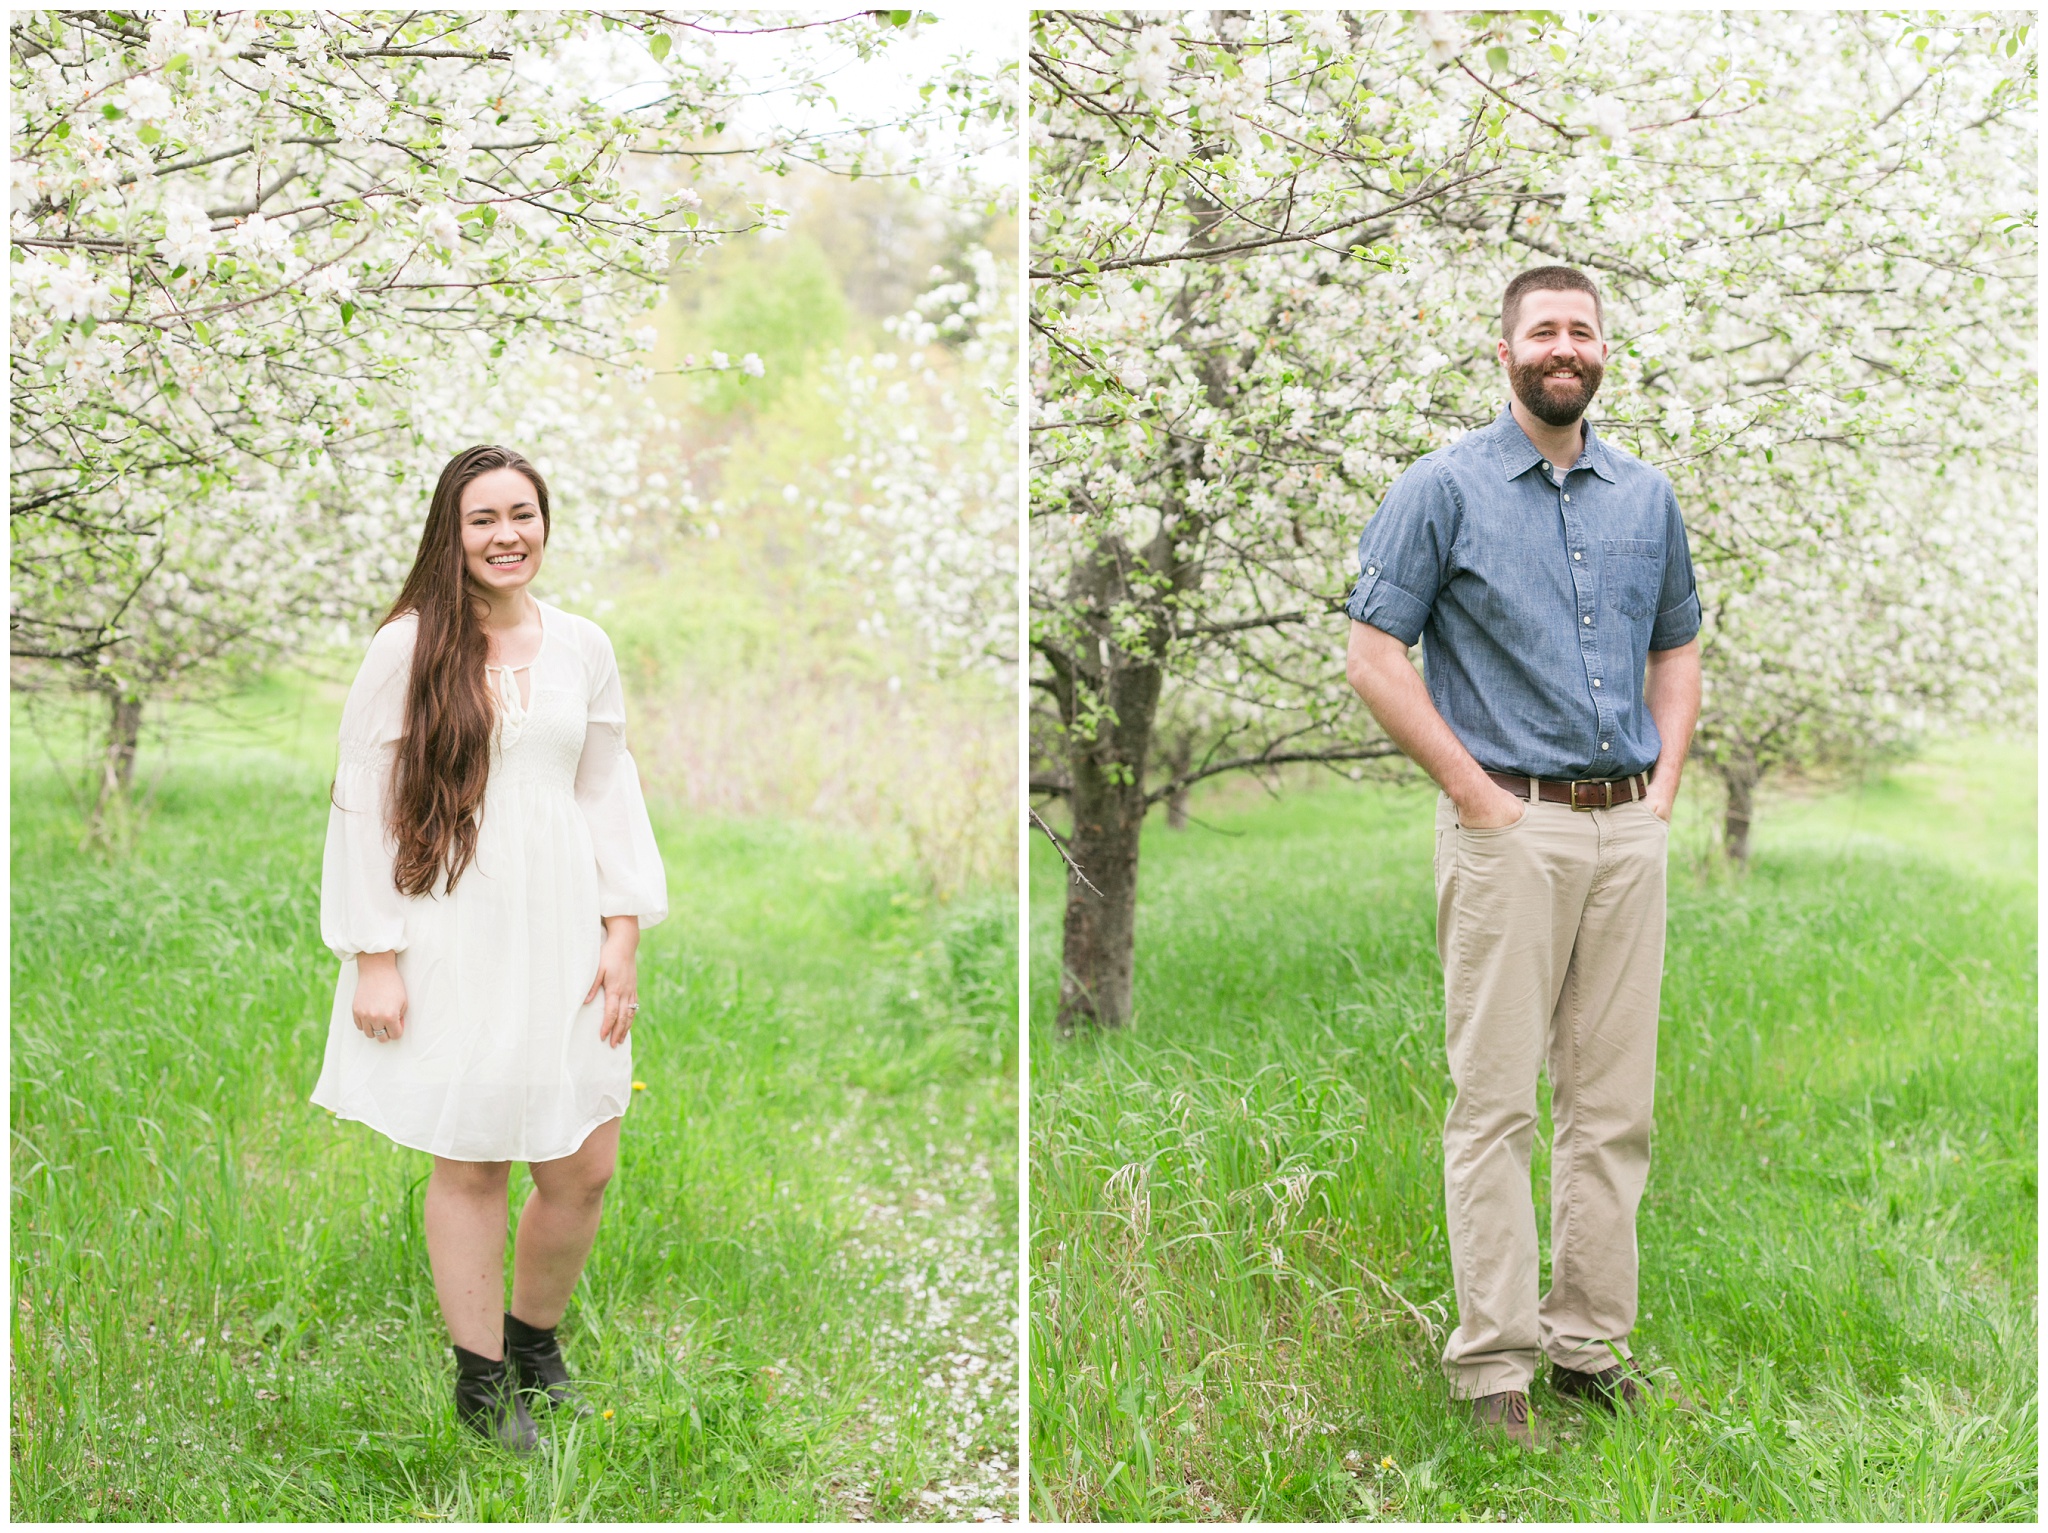 NH Wedding Photographer | Seacoast NH Epping, NH | Apple orchard Engagement Session 